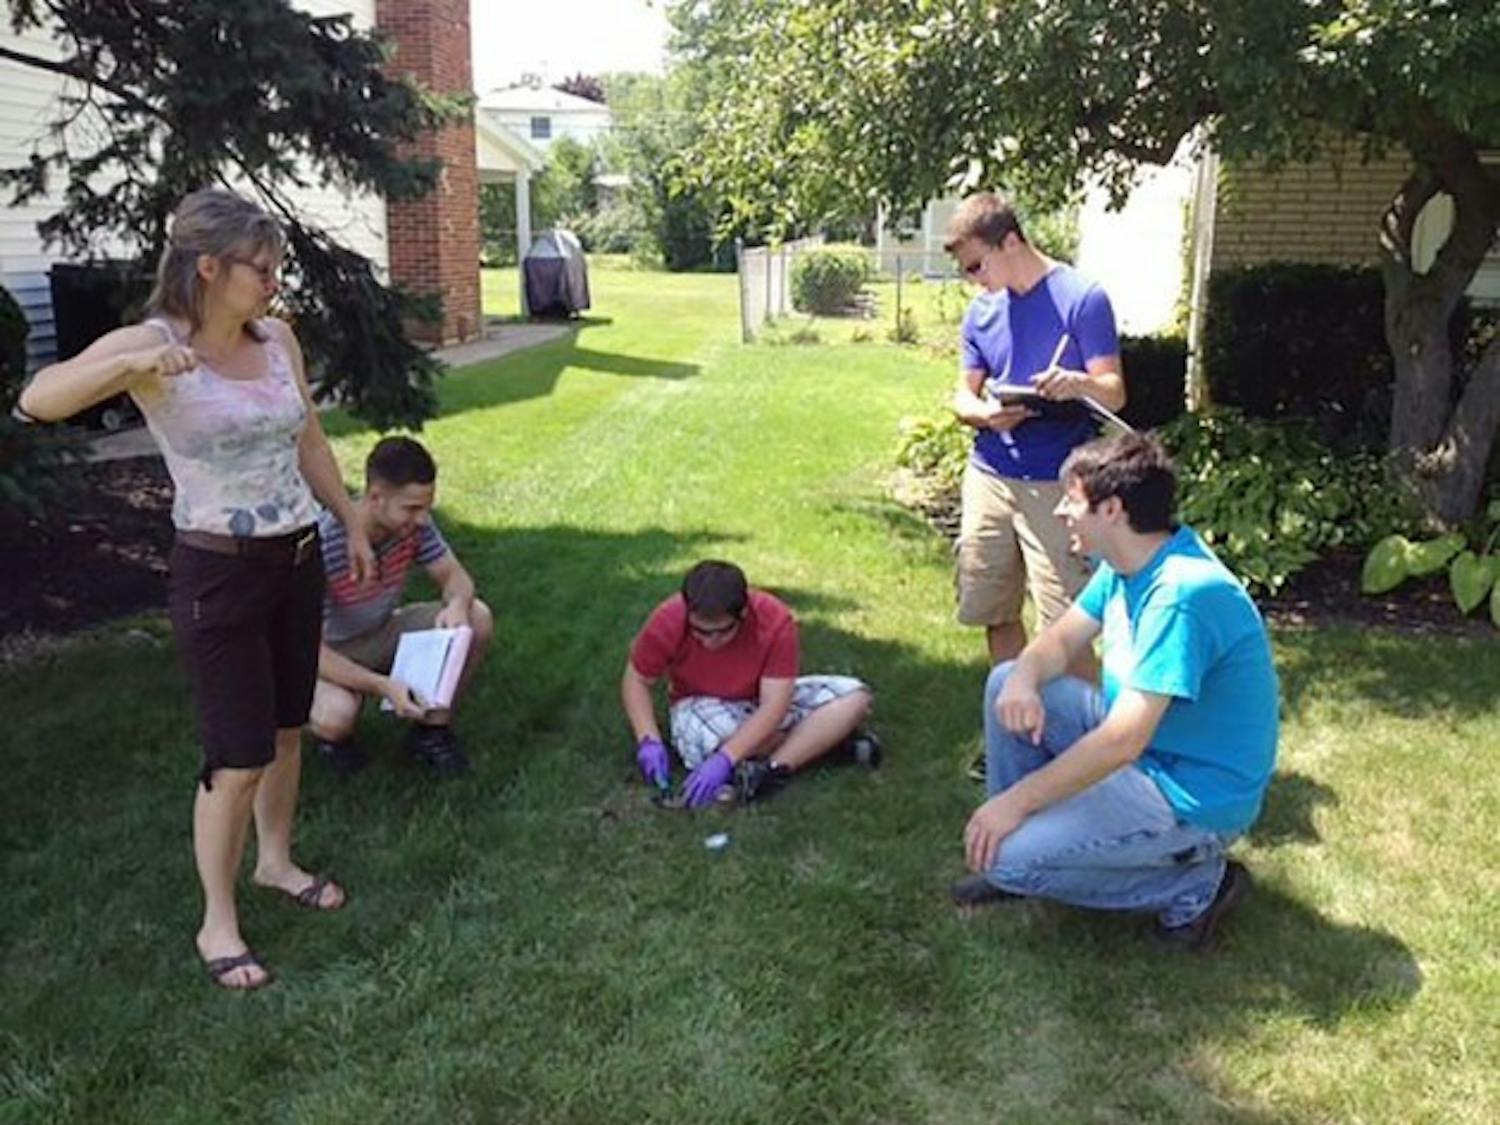 Members of Citizen Science Community Resources, from left to right, Jackie James-Creedon, Nick Bassisi, Jon Rusch, Alex Rusch and Andrew Baumgartner, take soil samples at a lawn in the Tonawanda area after high levels of benzene were detected in the air in 2004 and 2005. The benzene was traced to Tonawanda Coke, which produces coke to be used in the production of steel.&nbsp;Courtesy of Citizen Science Community Resources